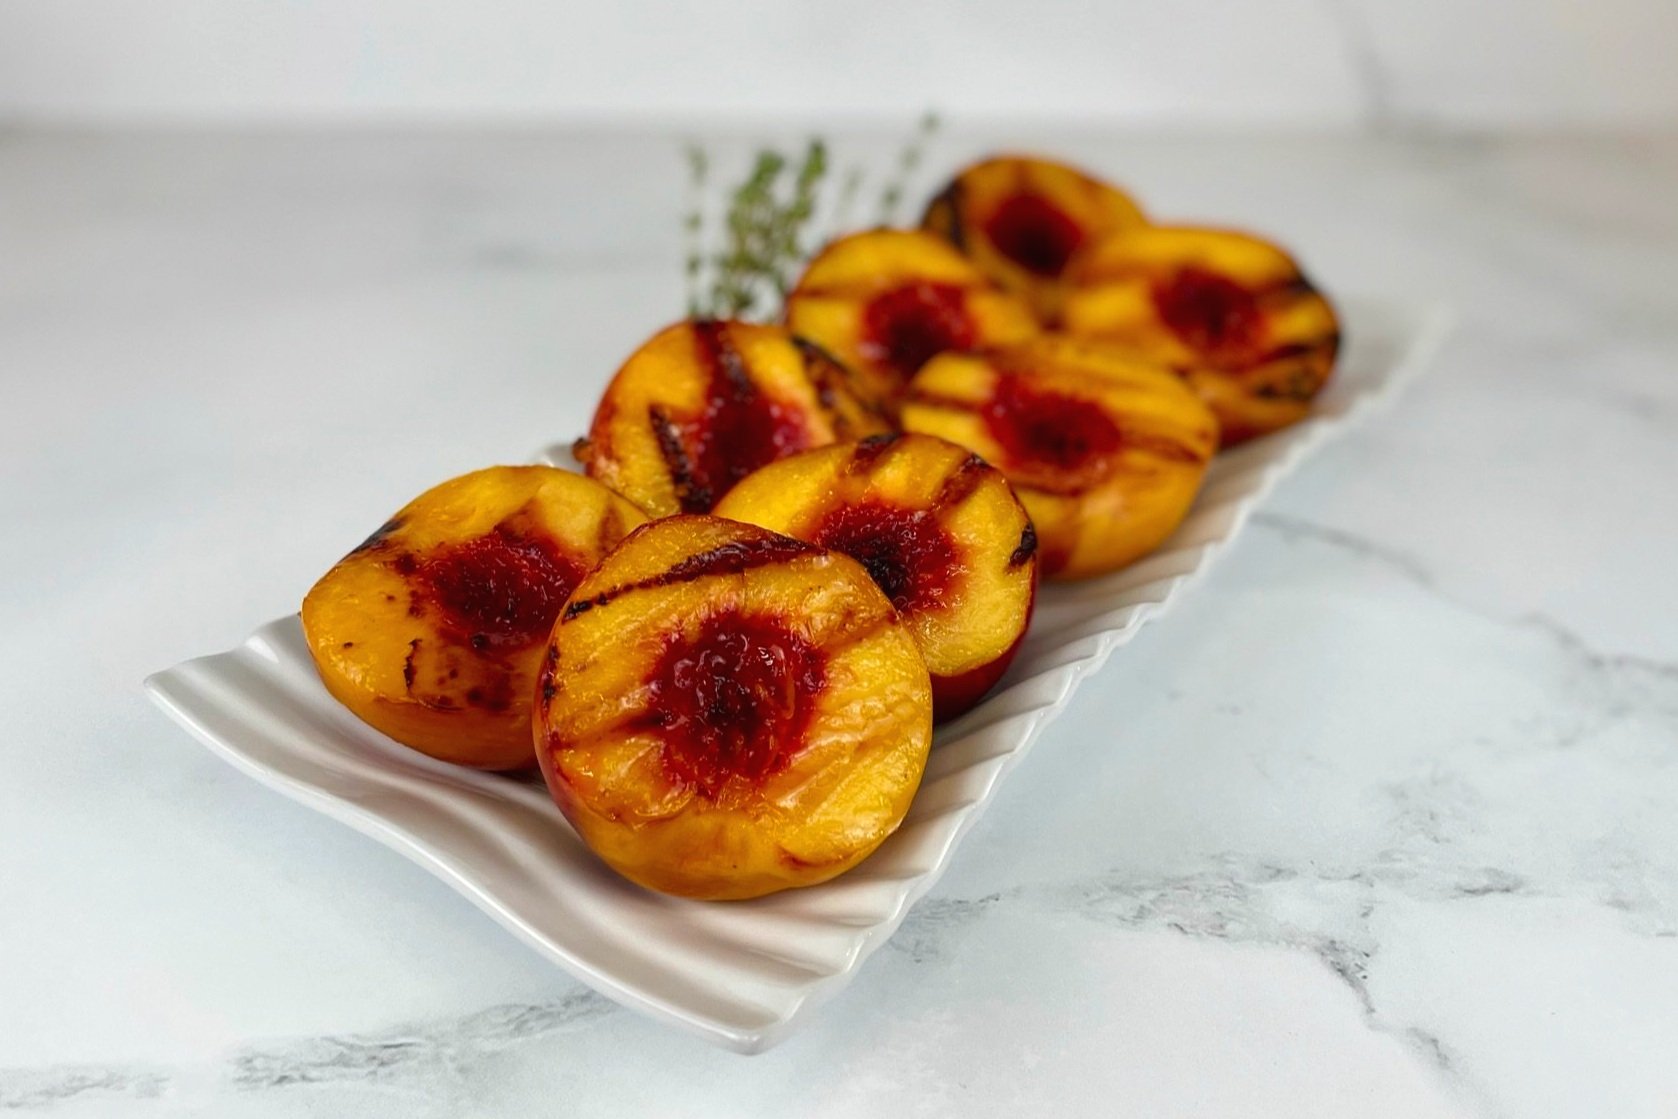 Grilled+Peaches+with+Mascarpone+IG+2a.jpg